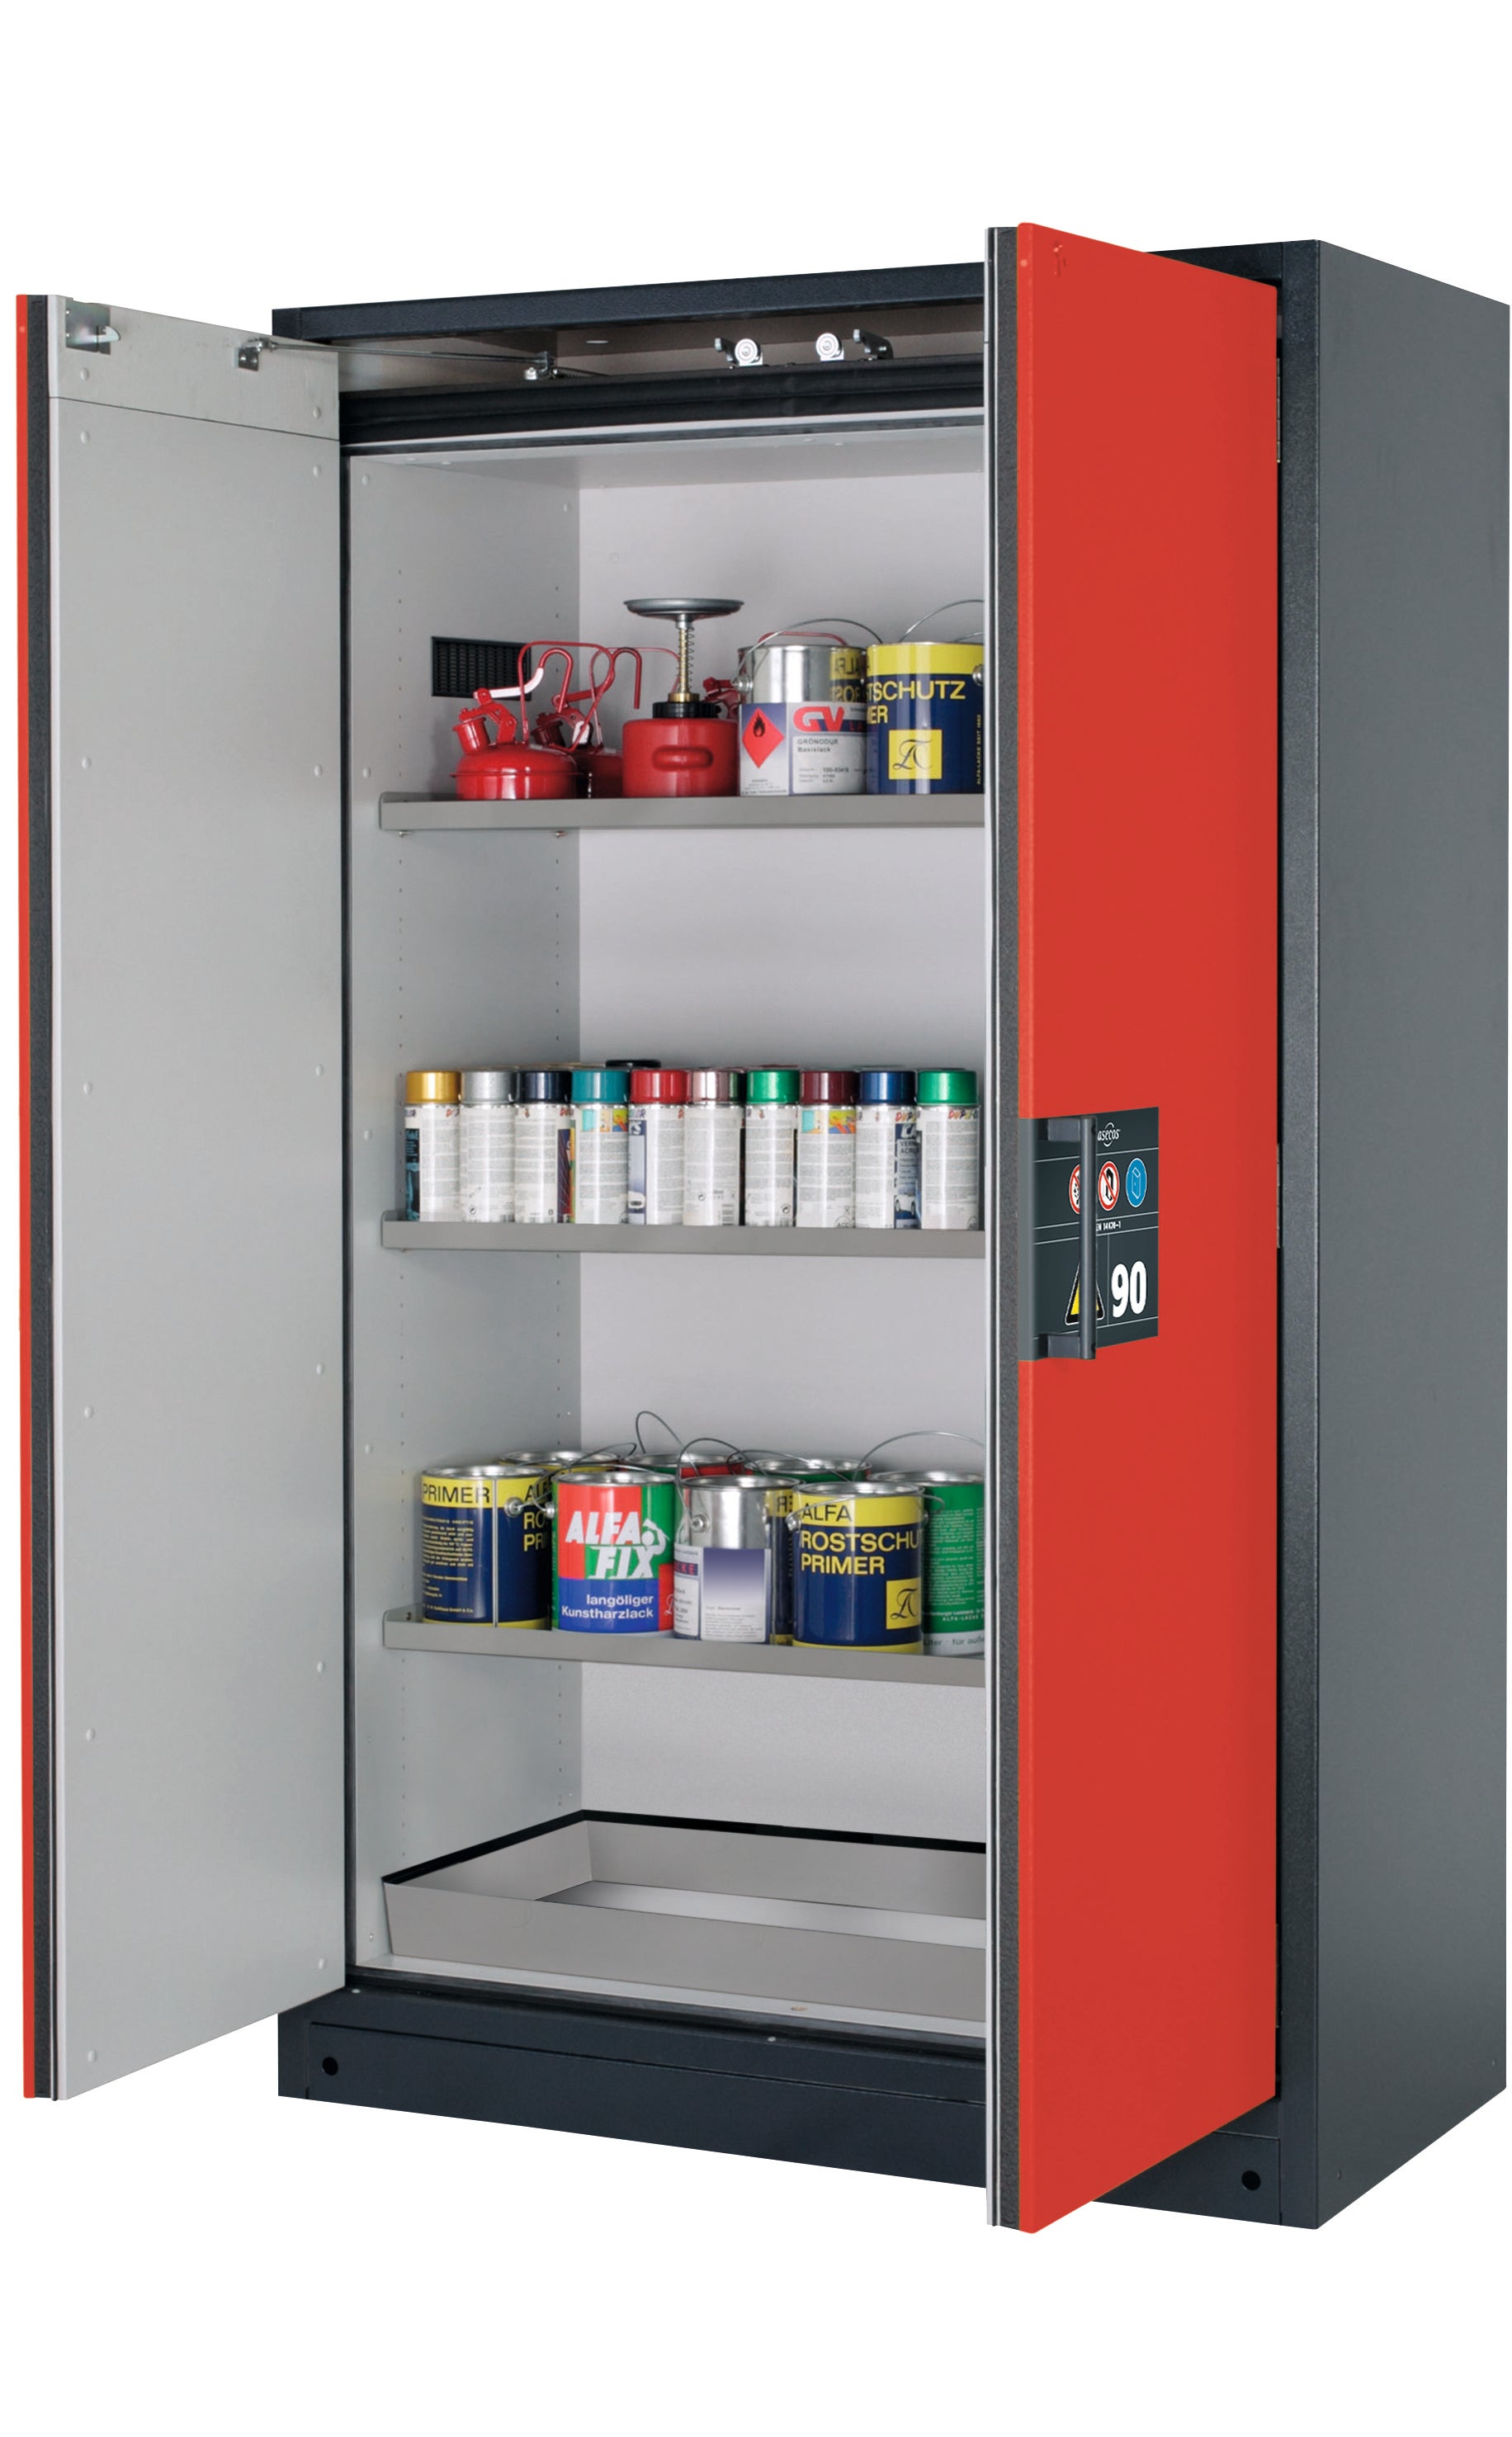 Type 90 safety storage cabinet Q-CLASSIC-90 model Q90.195.120 in traffic red RAL 3020 with 3x shelf standard (stainless steel 1.4301),